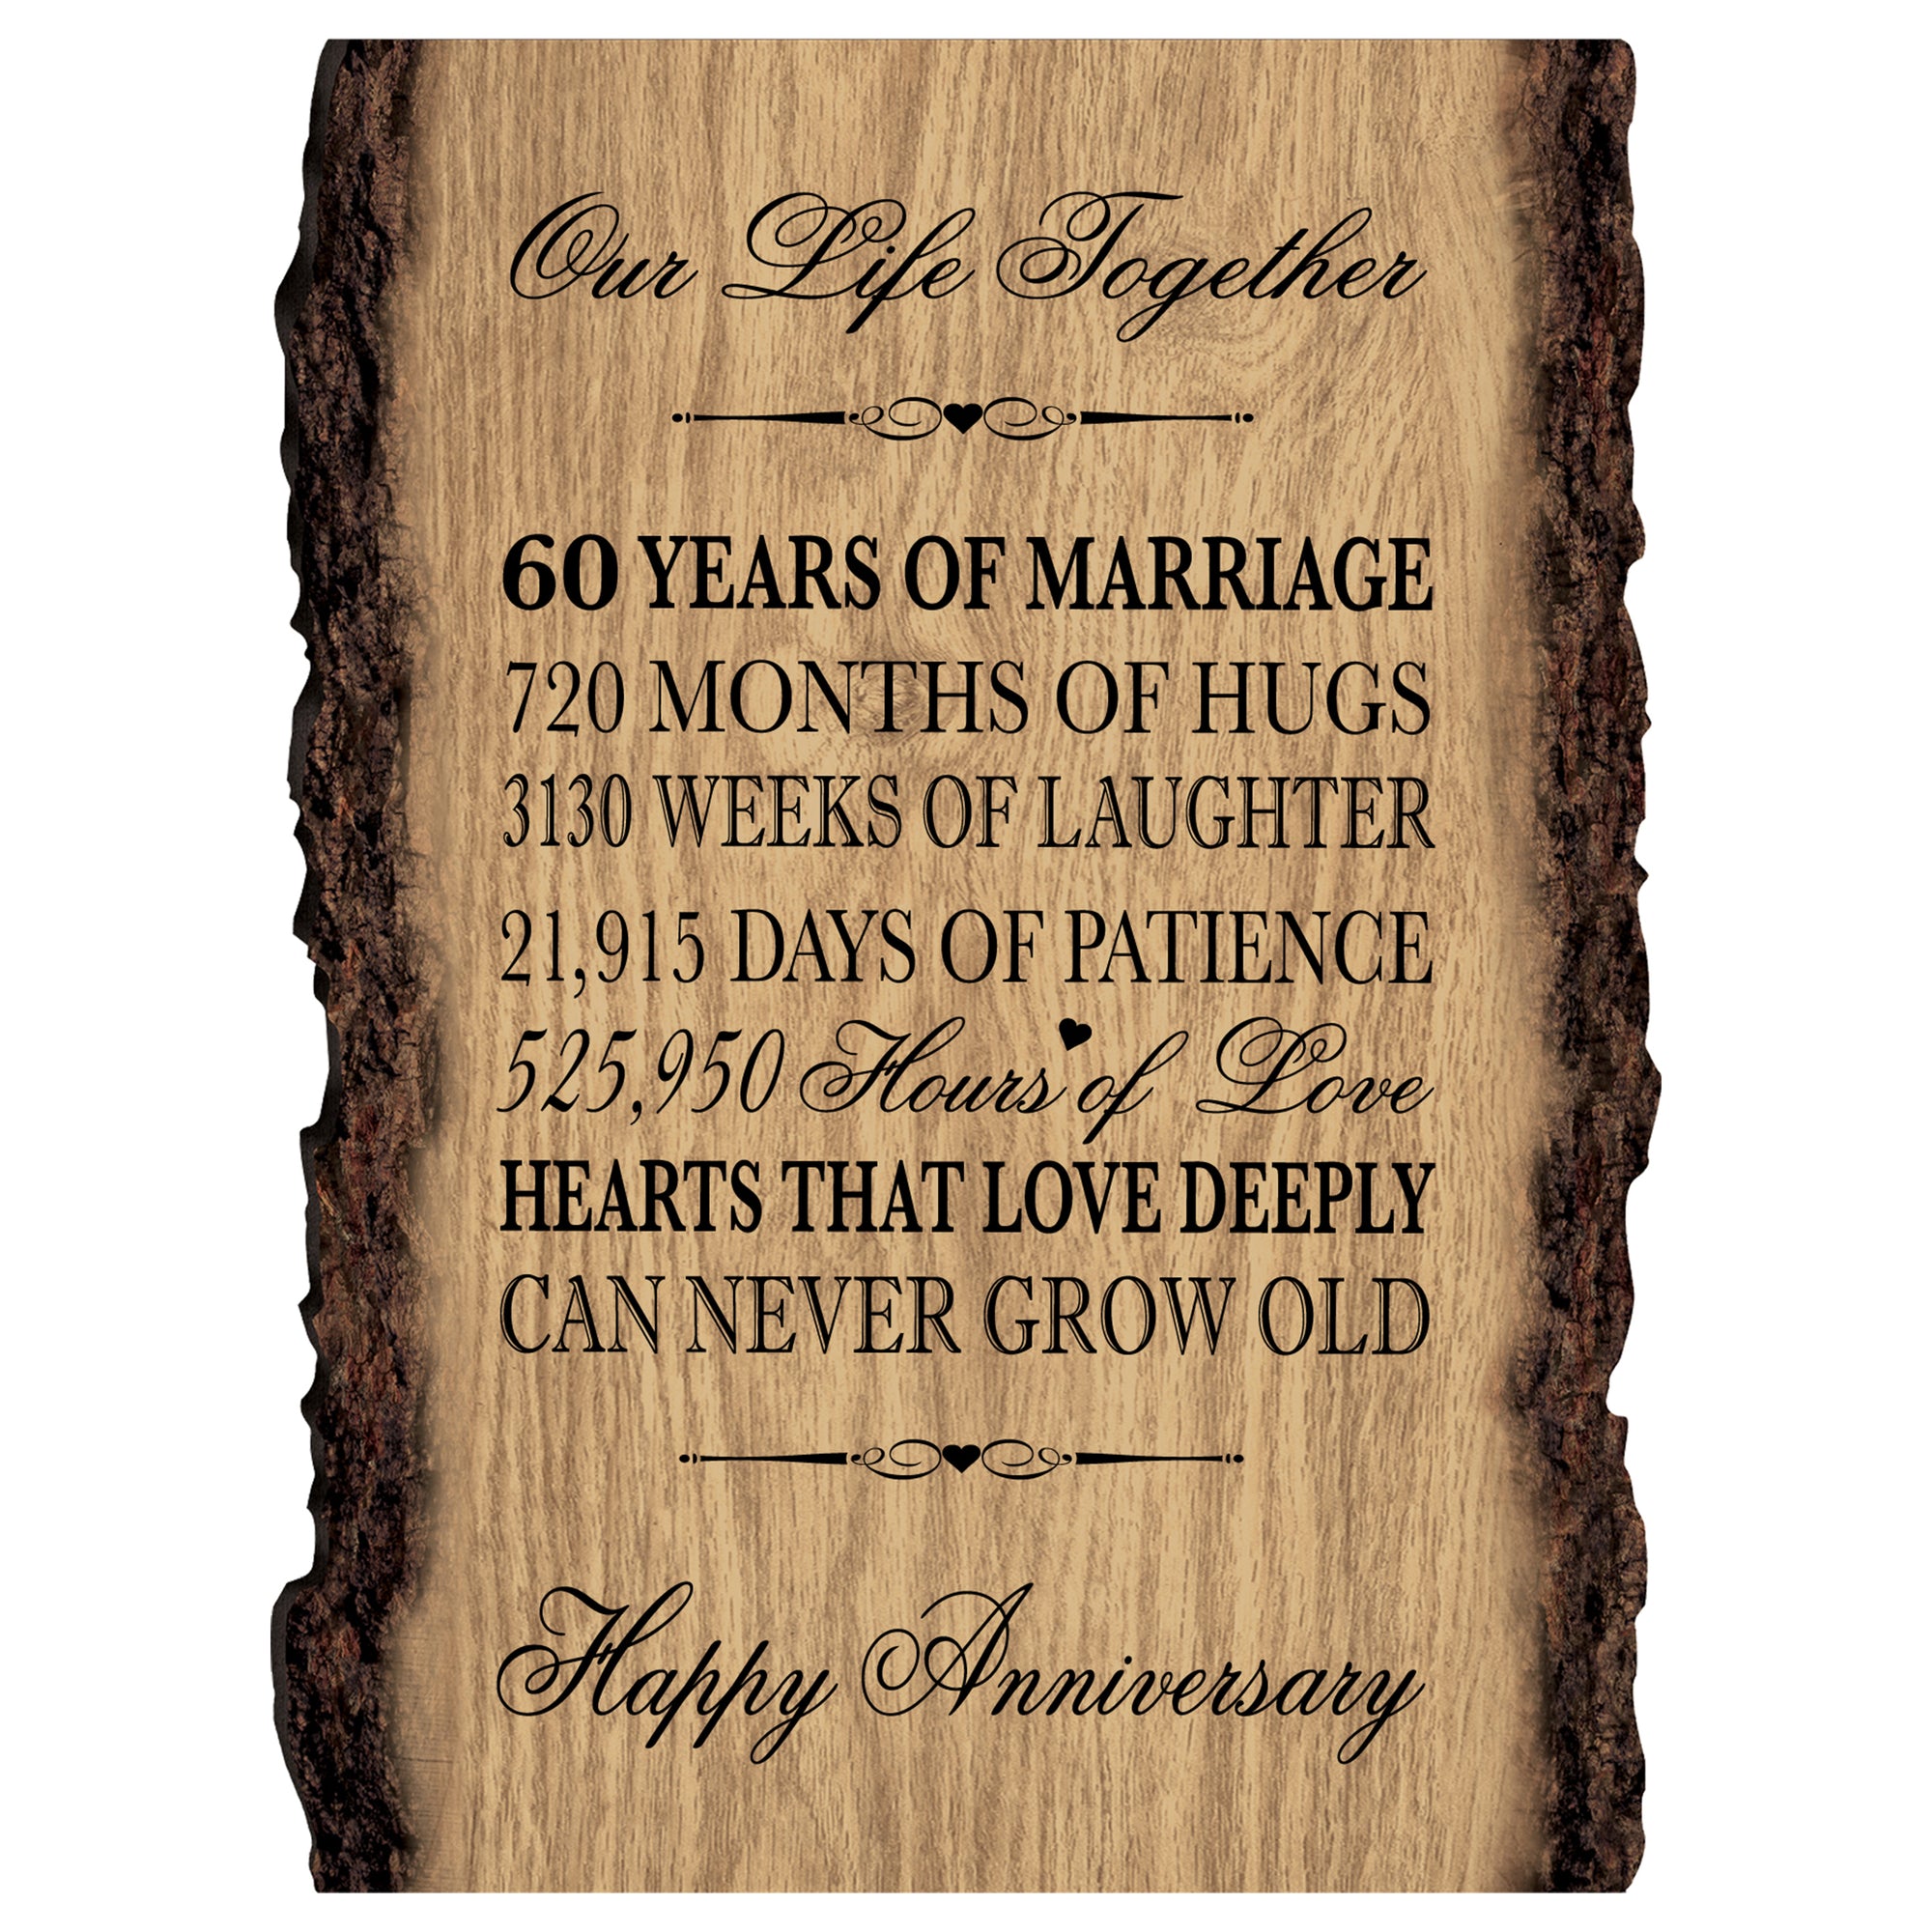 Rustic Wedding Anniversary 9x12 Barky Wall Plaque Gift For Parents, Grandparents New Couple - 60 Years Of Marriage